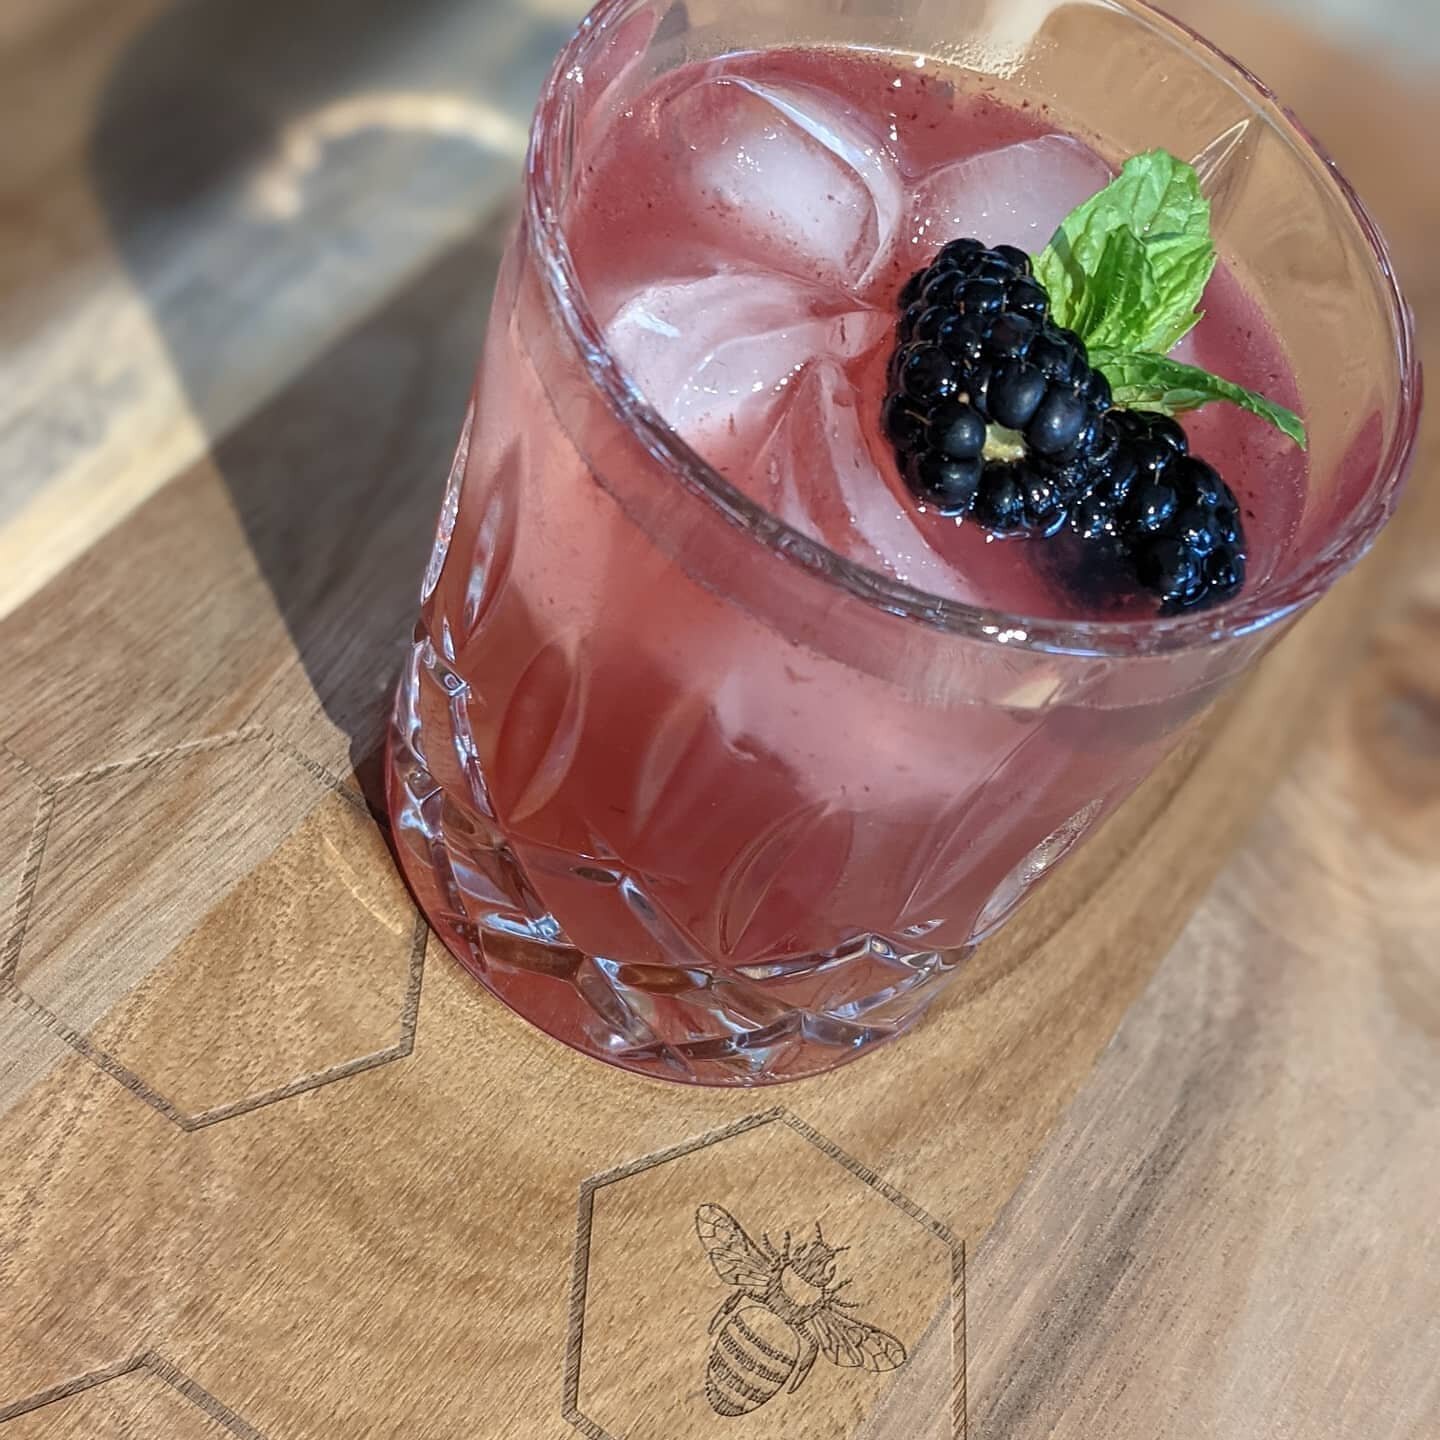 Blackberry Bramble 🖤 
Don't forget to save this recipe for later! 

If you don't love the dry spice that comes with Ginger beer, soda water makes a great substitution and really let's your drink focus on the floral and blackberry flavors. 

#mobileb